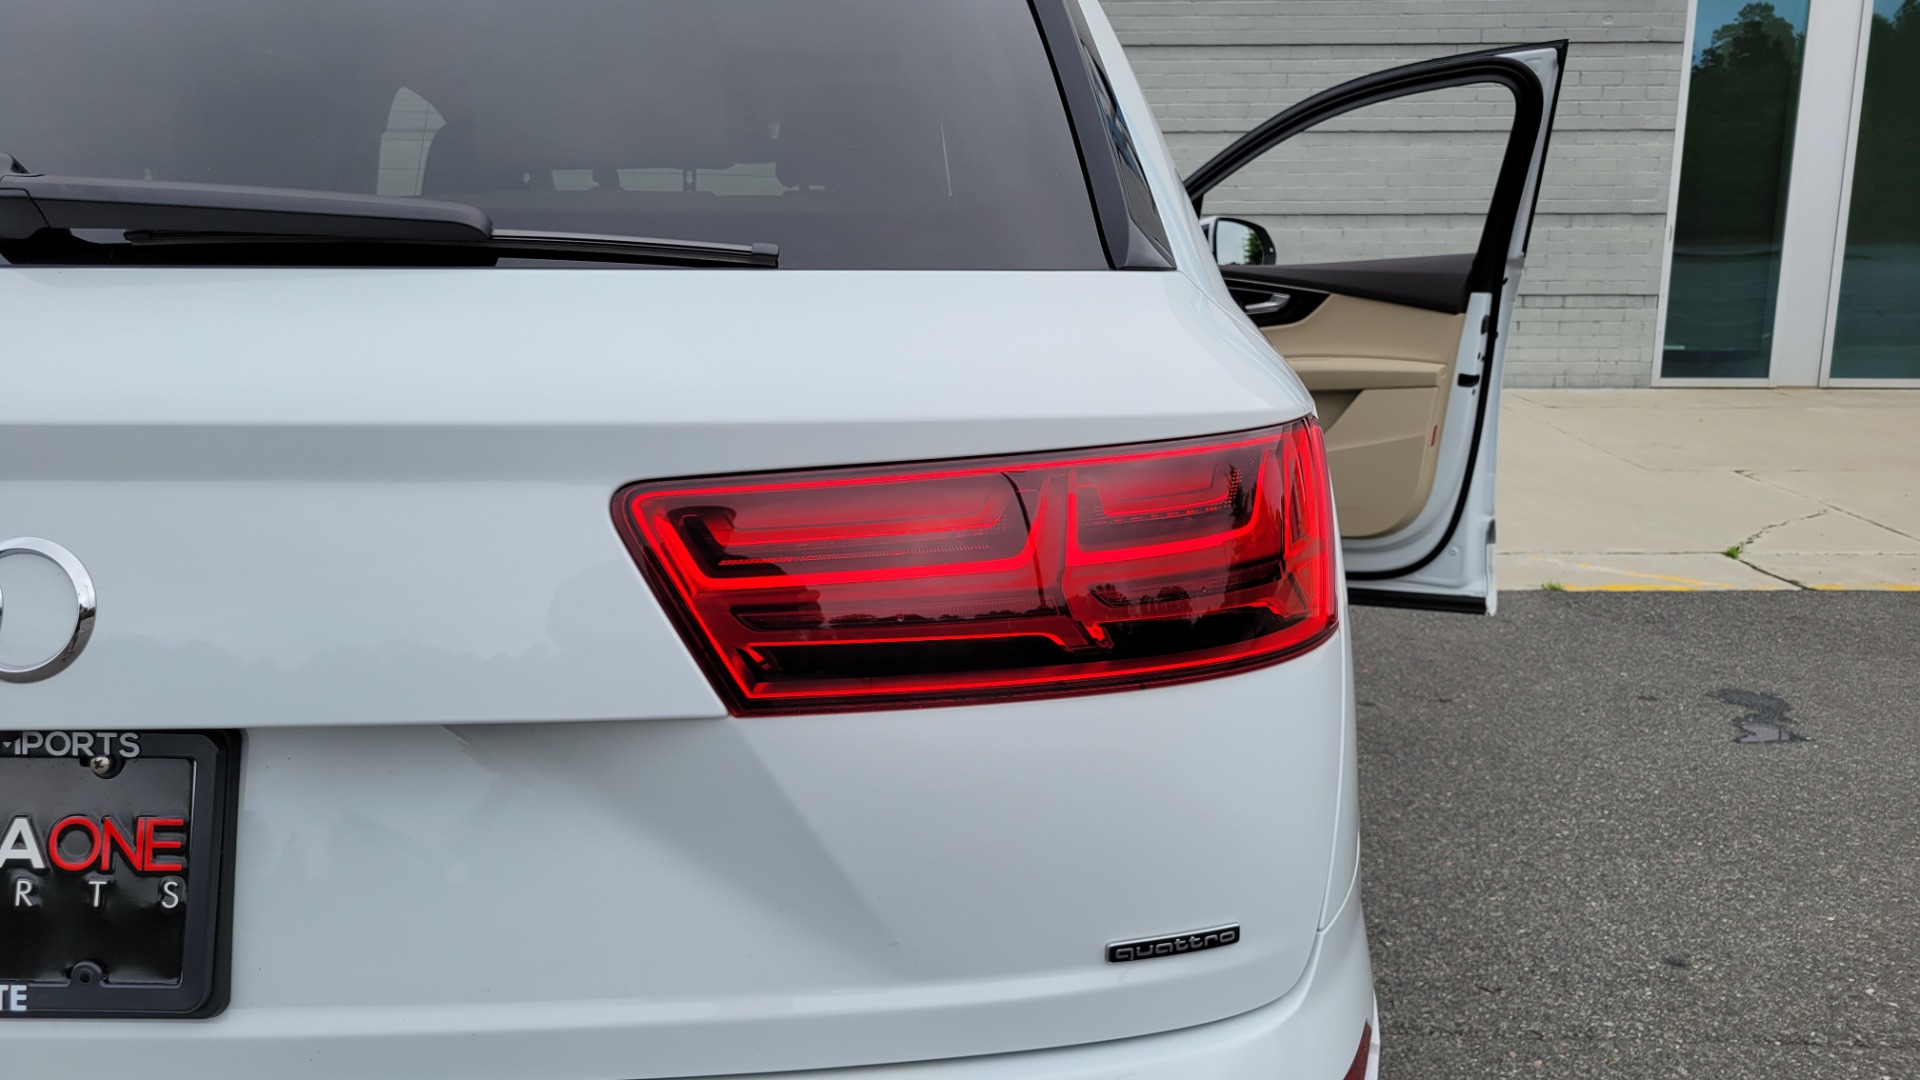 Used 2019 Audi Q7 PRESTIGE / CONV PKG / BOSE / HUD / CLD WTHR / TOWING / REARVIEW for sale $51,995 at Formula Imports in Charlotte NC 28227 36